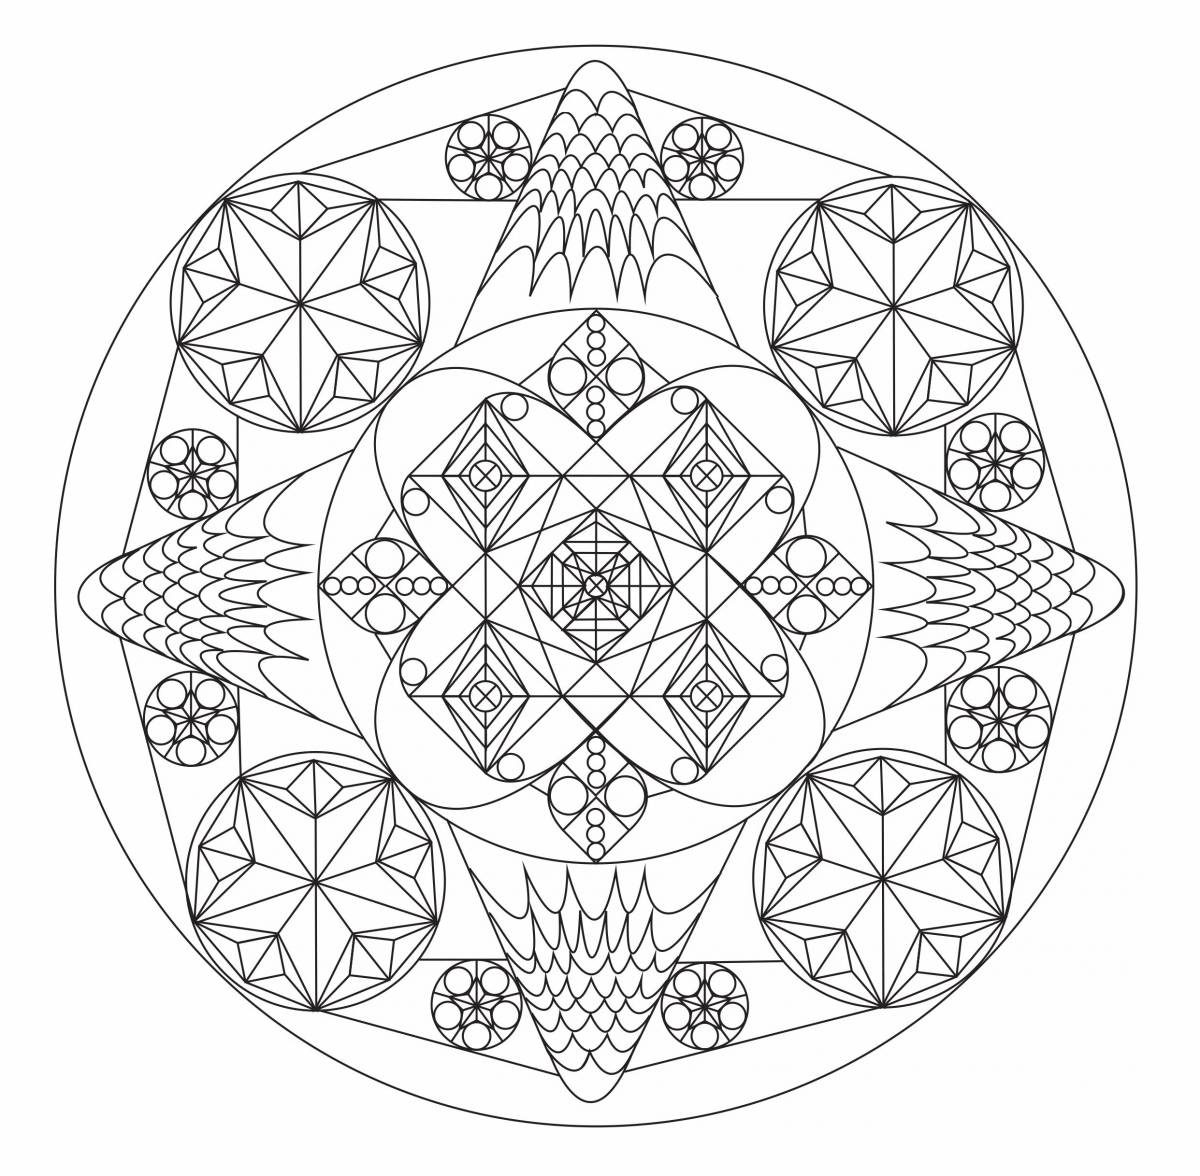 Inspirational coloring mandala of peace and tranquility